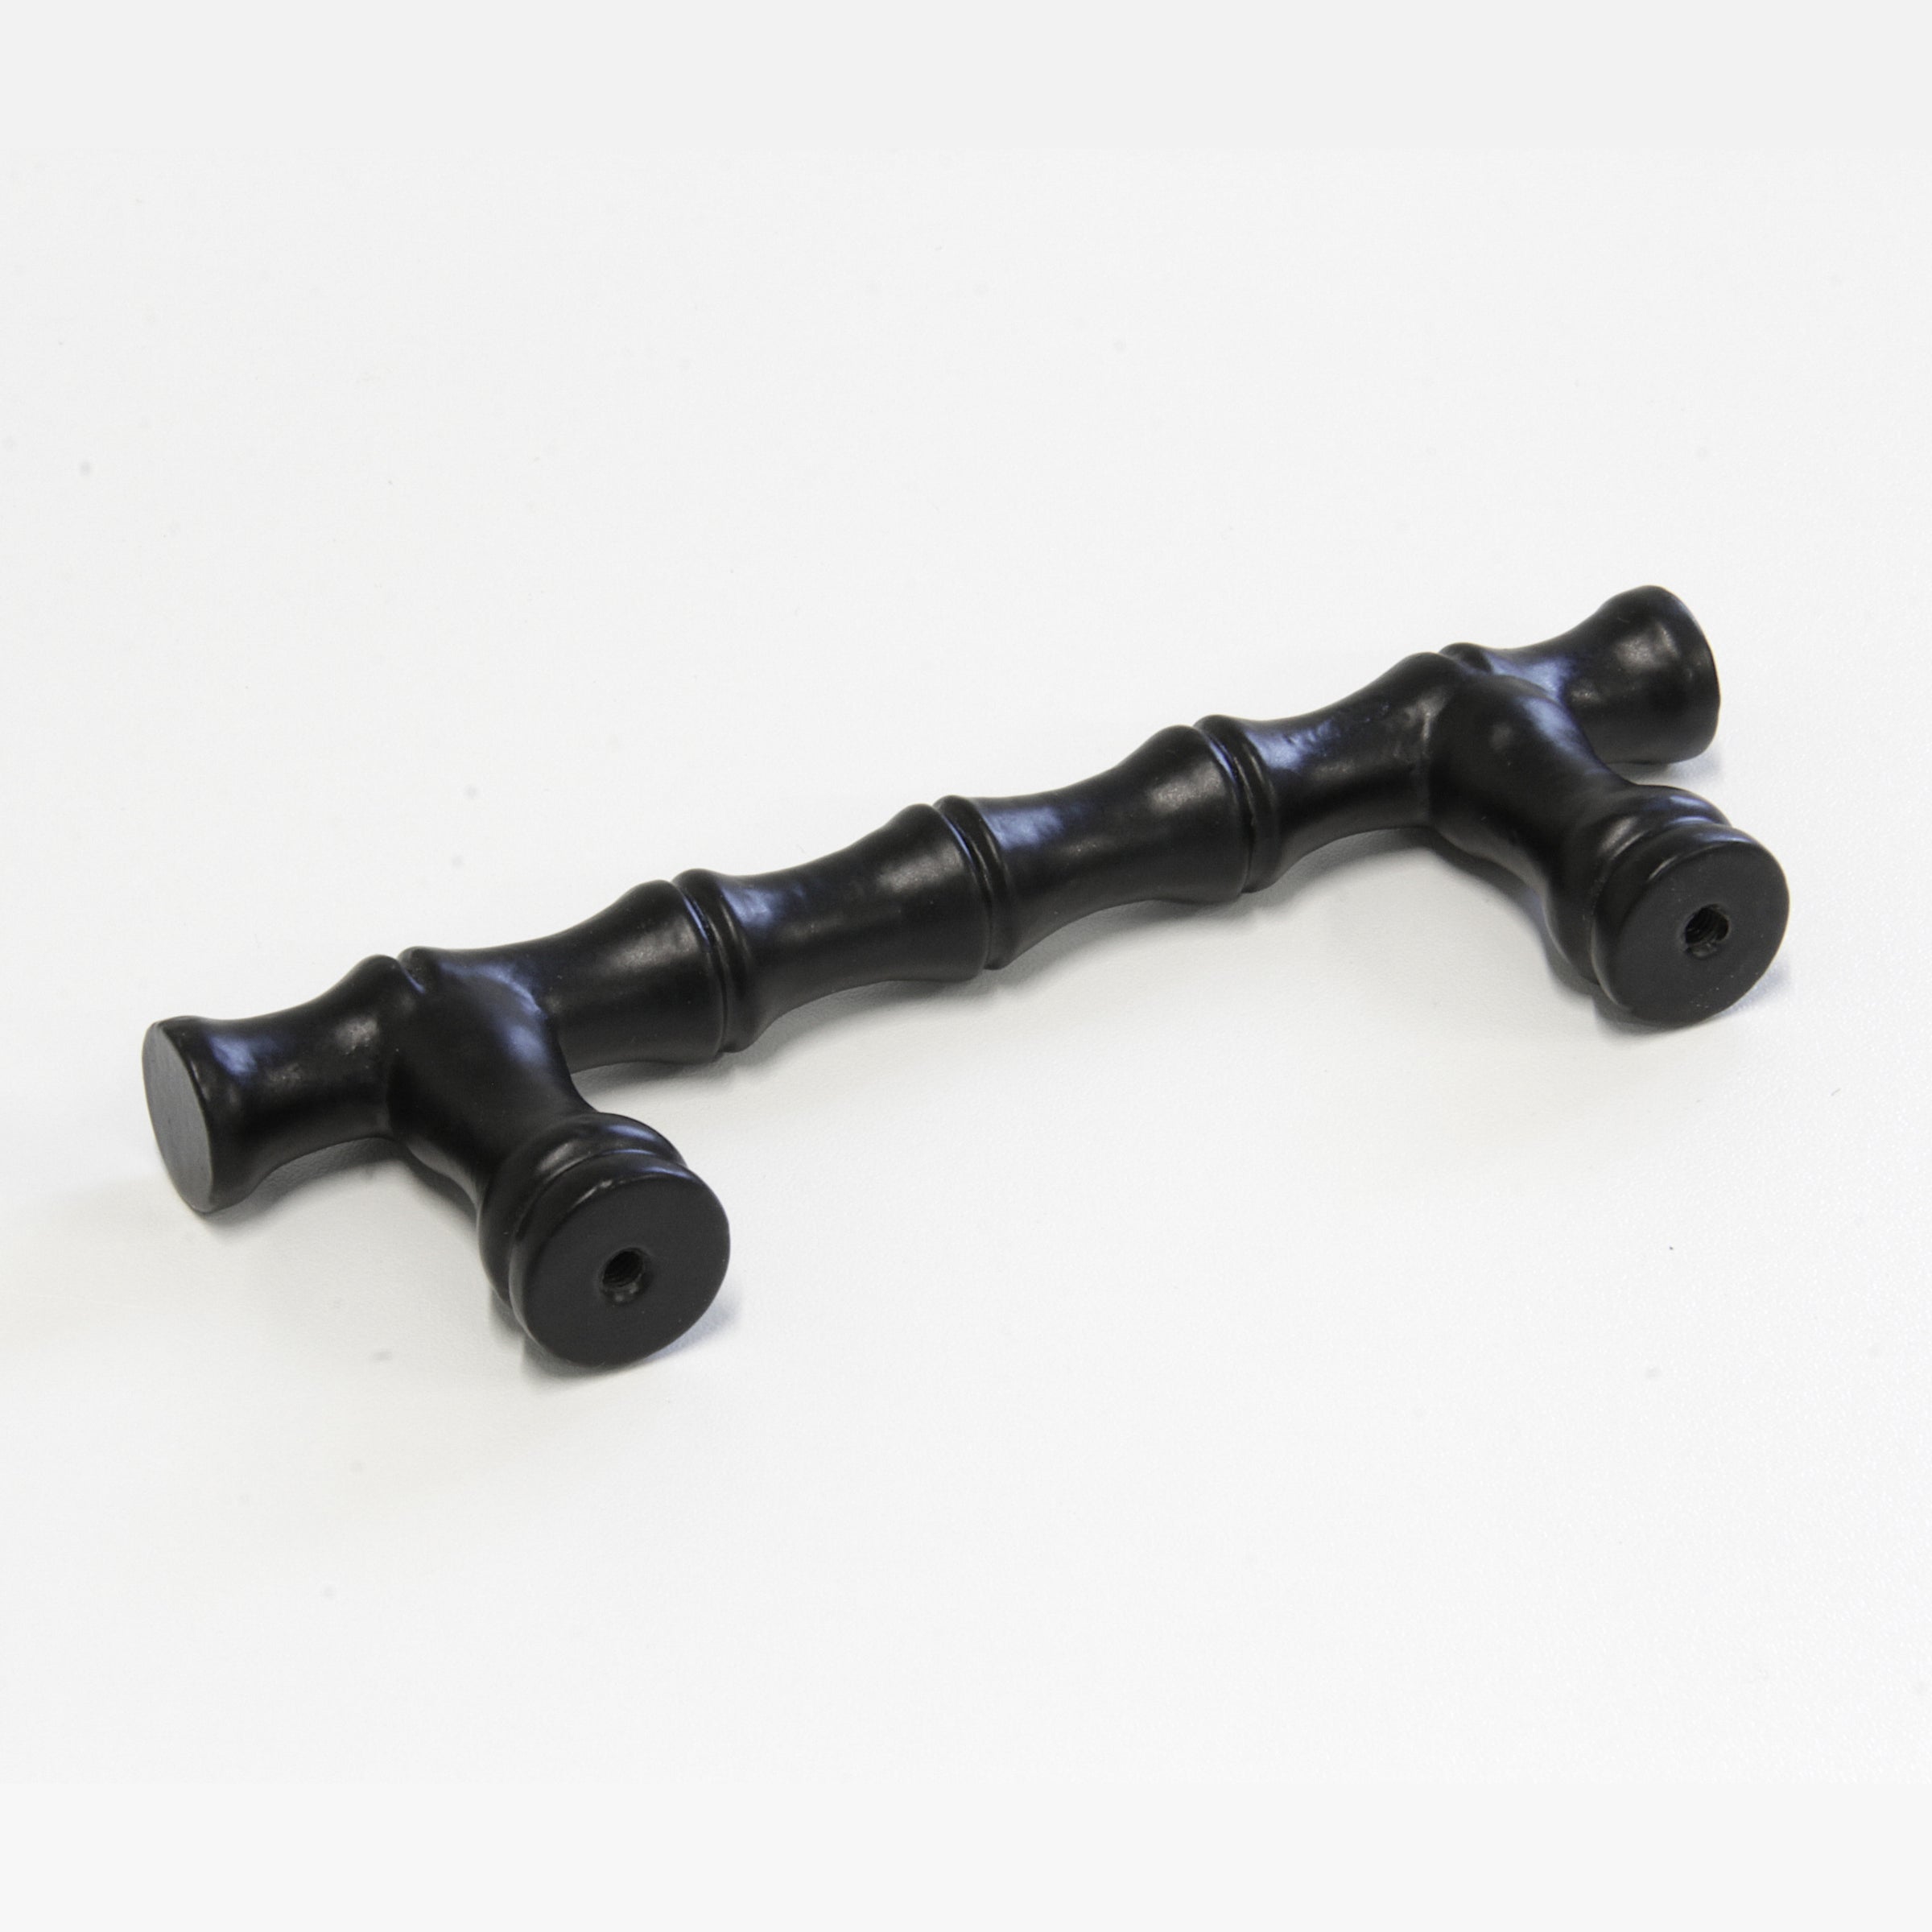 Handle IR8359] Solid Cast Iron Traditional Handle Pull (4 1/4 Inch)